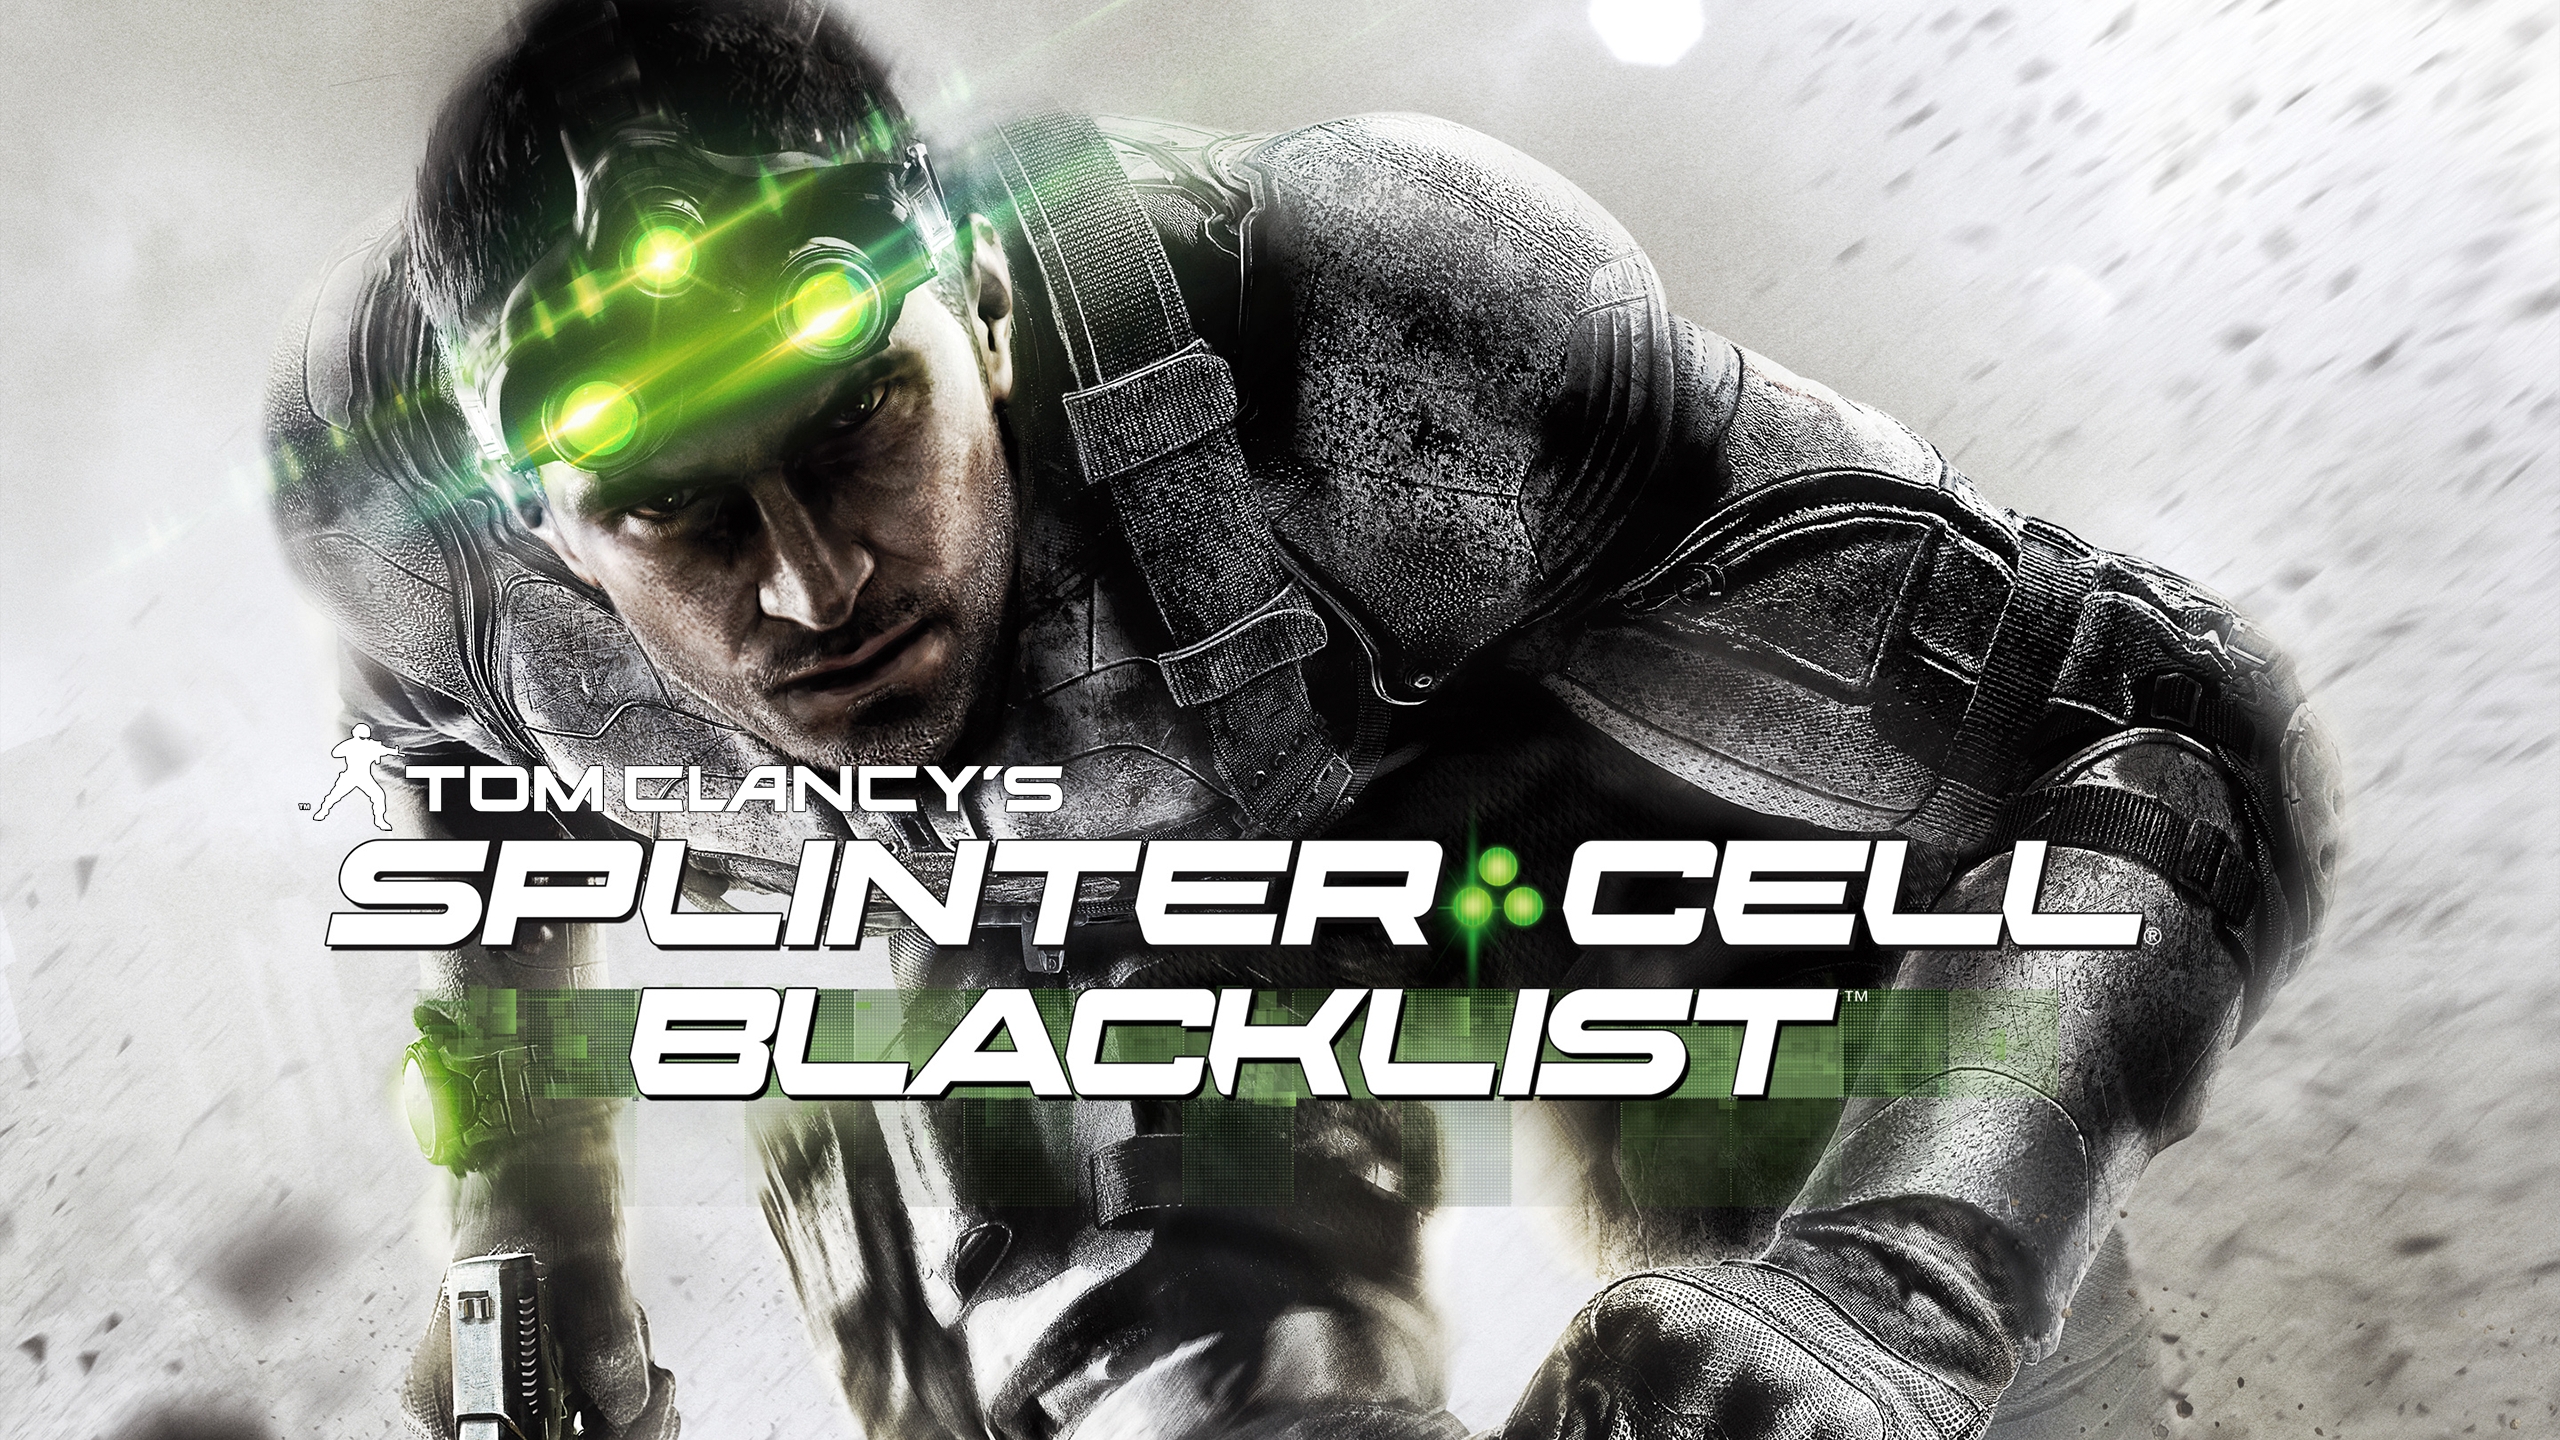 Tom Clancy's Splinter Cell Blacklist Ubisoft Connect for PC - Buy now